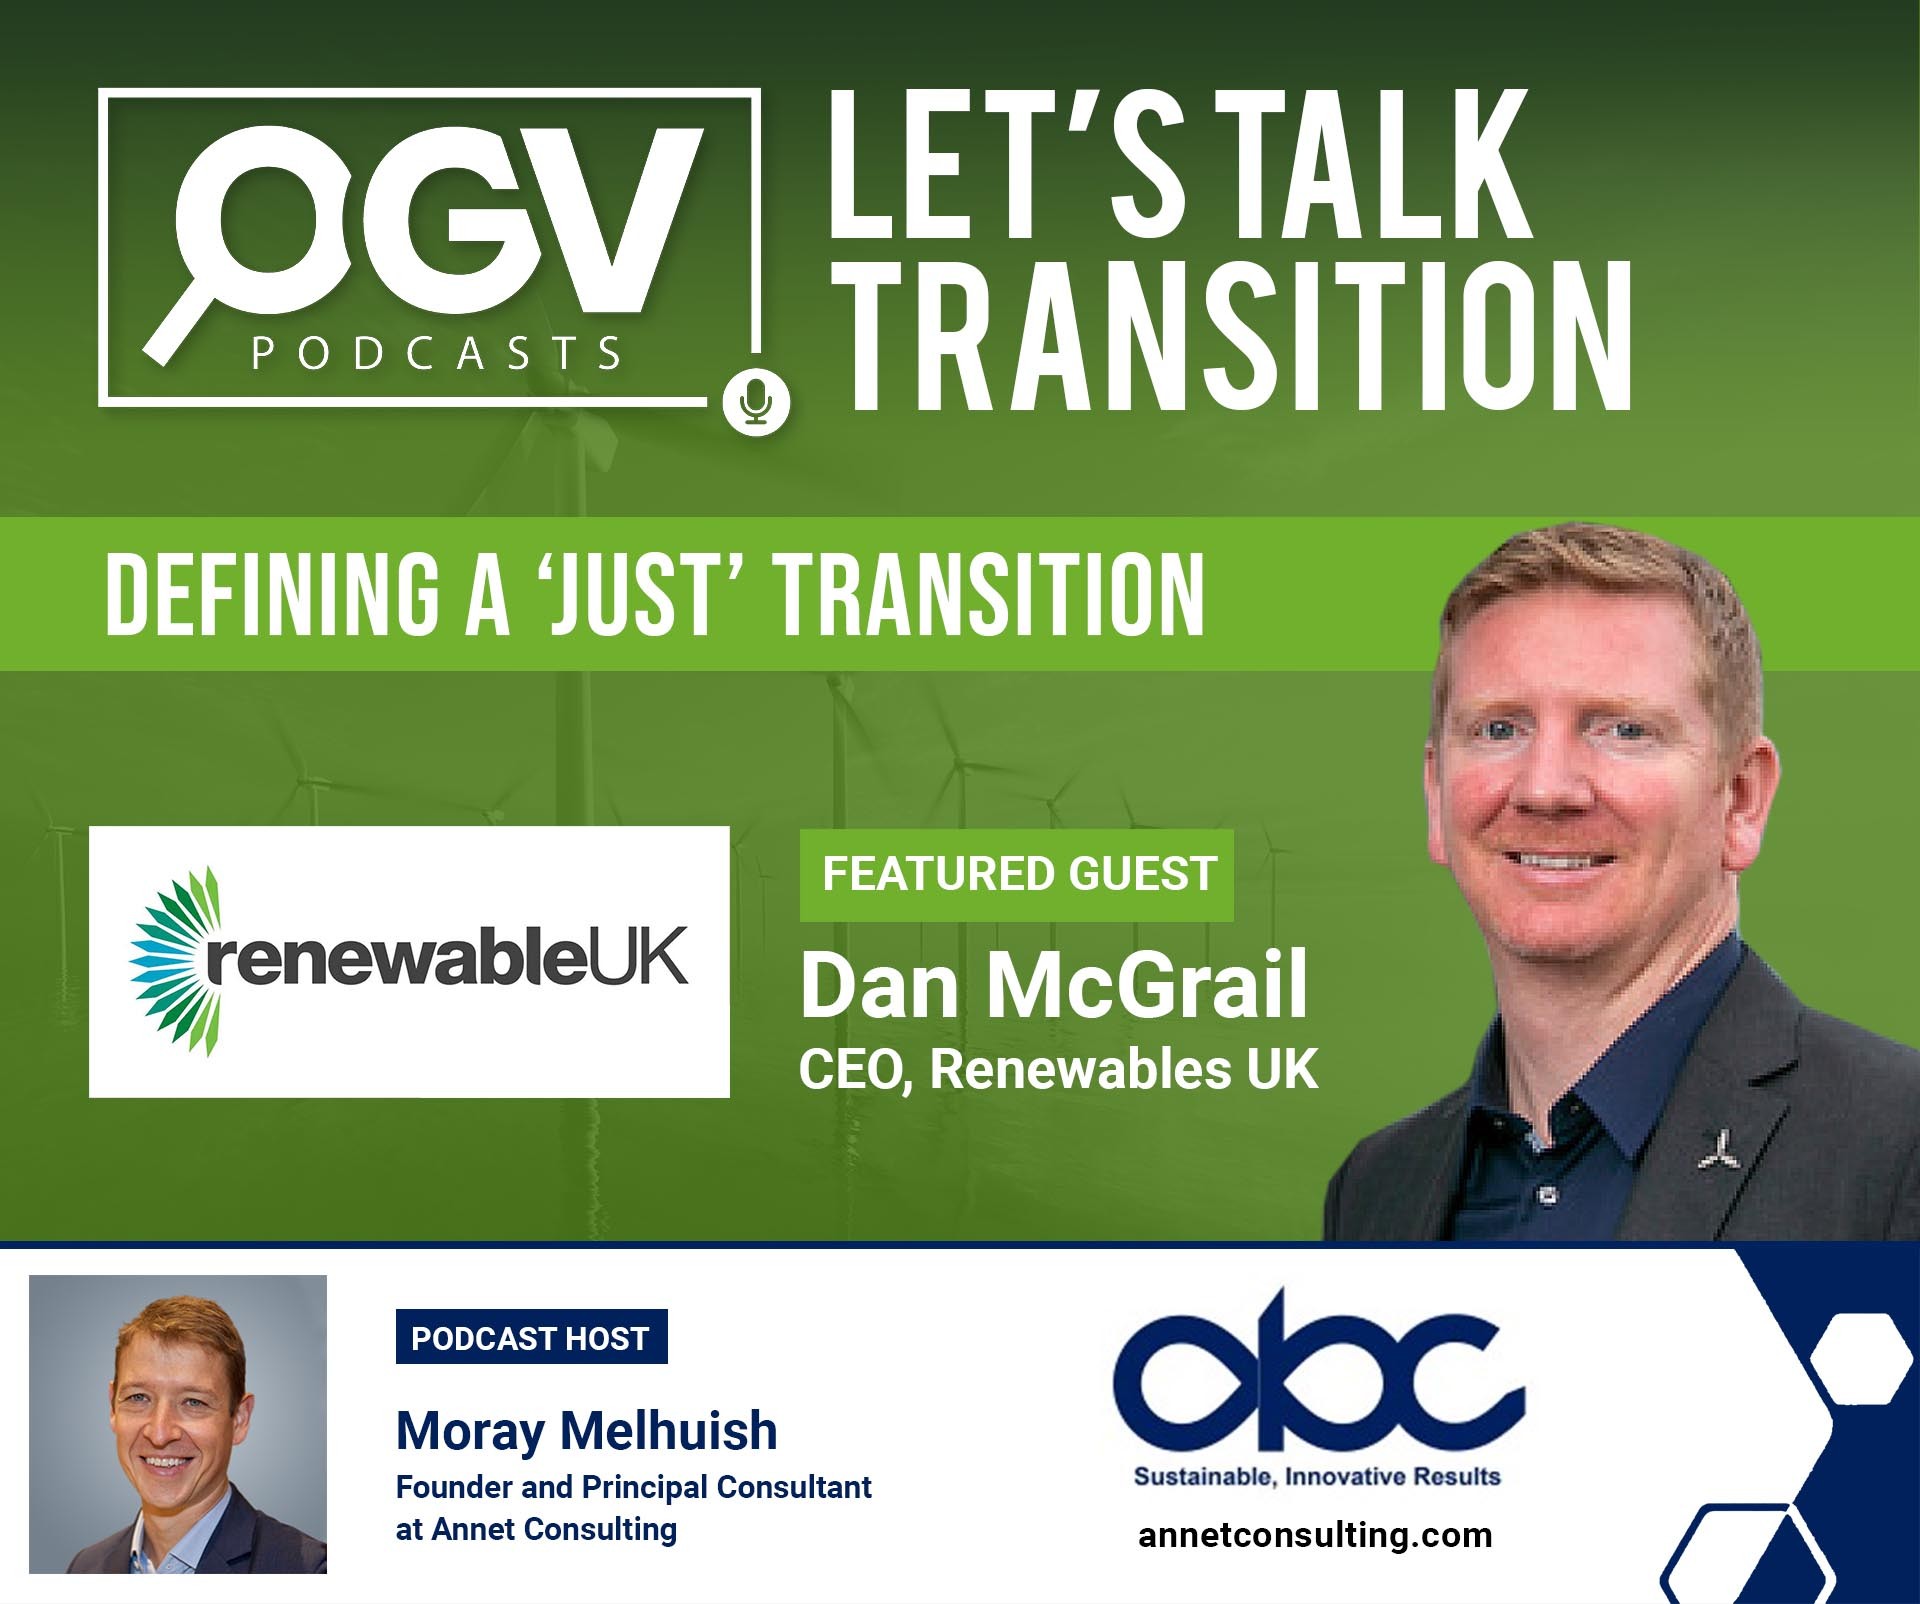 Defining a 'Just' Transition - Interview with Dan McGrail, CEO, Renewables UK